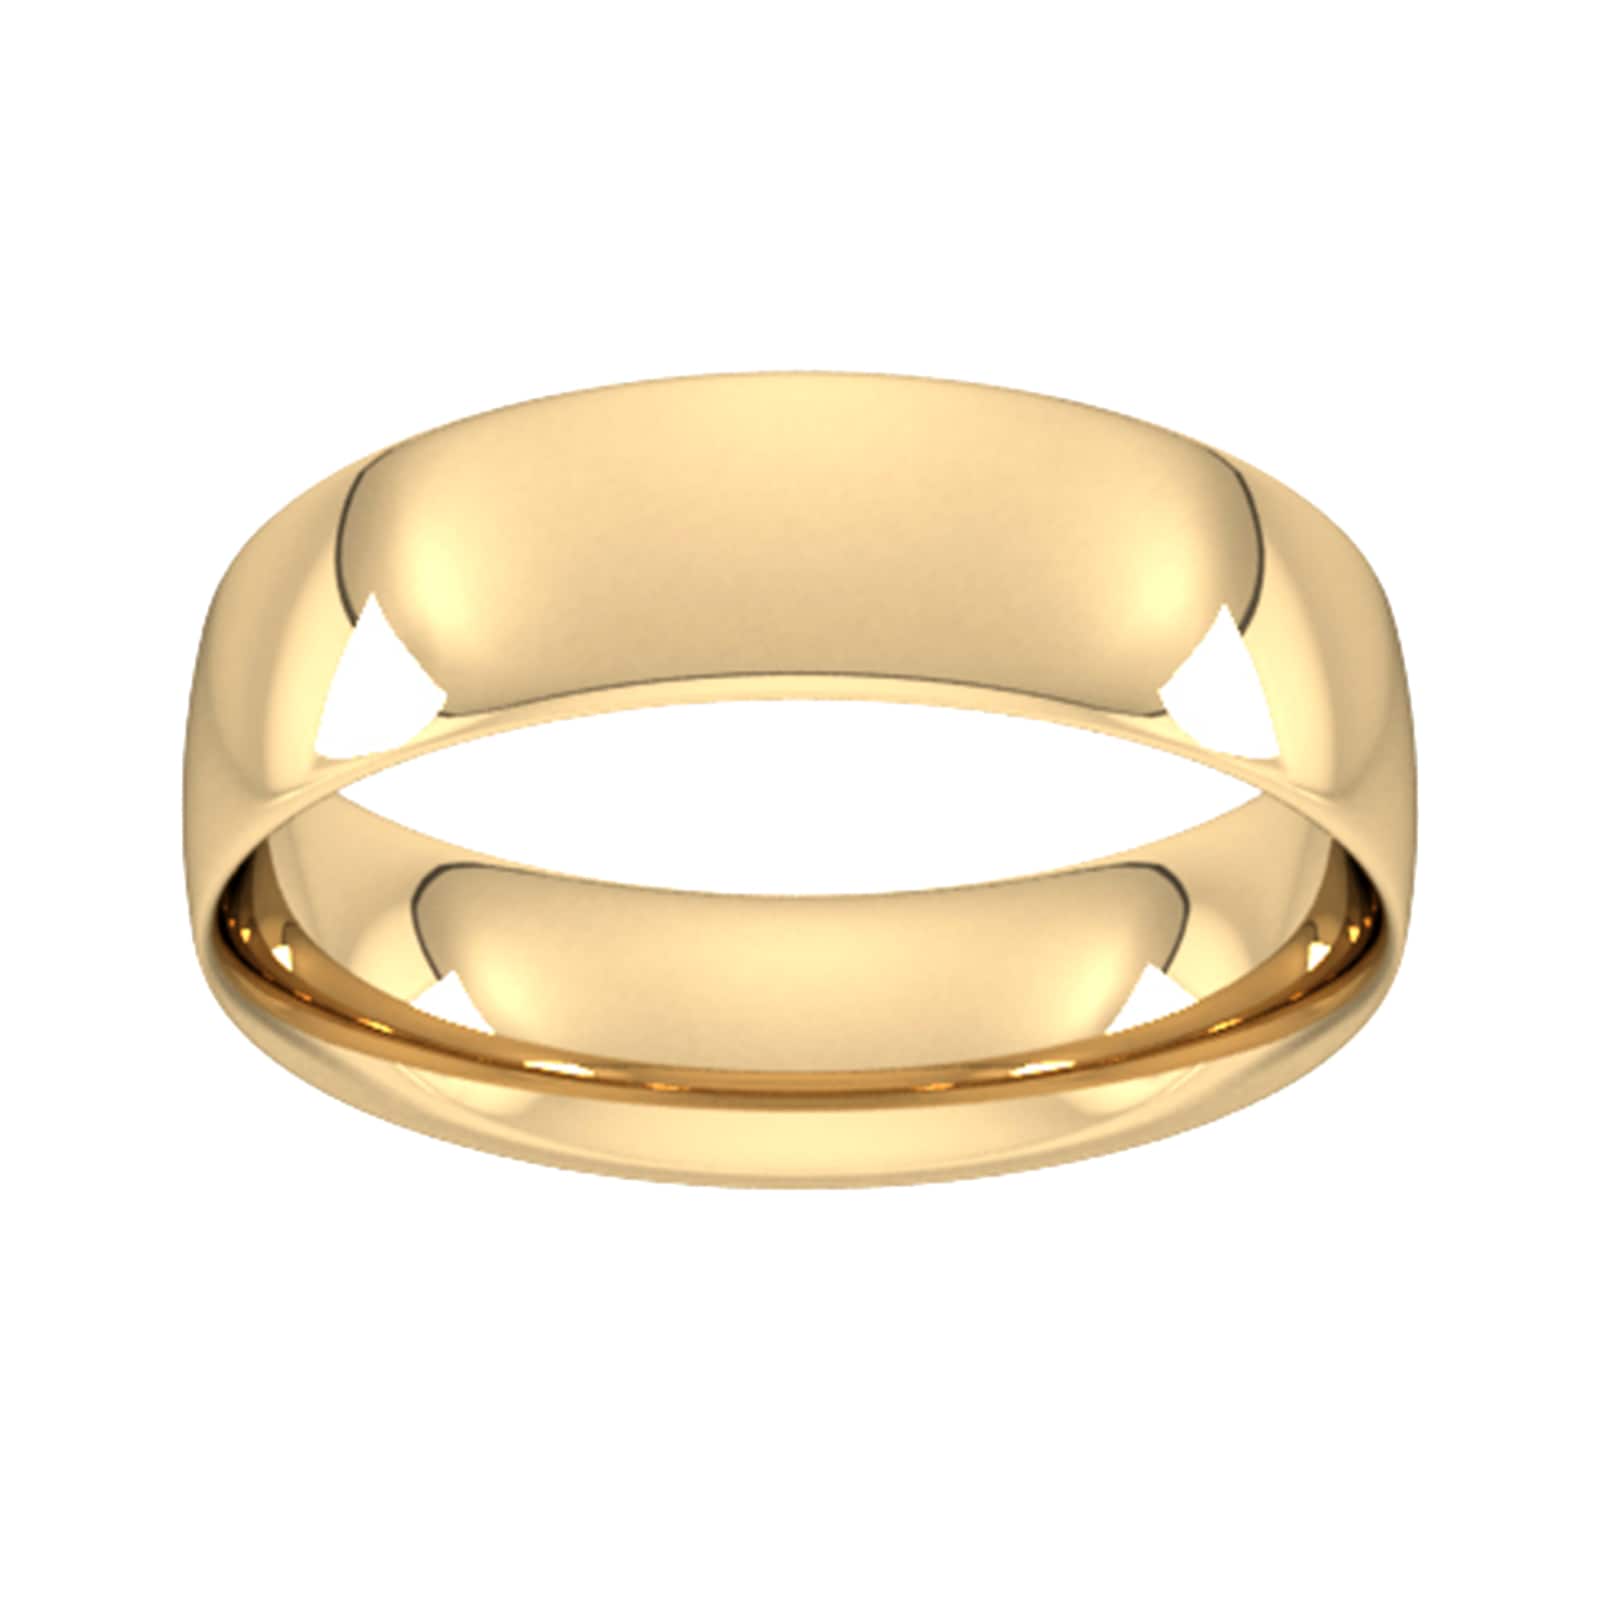 6mm Traditional Court Standard Wedding Ring In 9 Carat Yellow Gold - Ring Size O